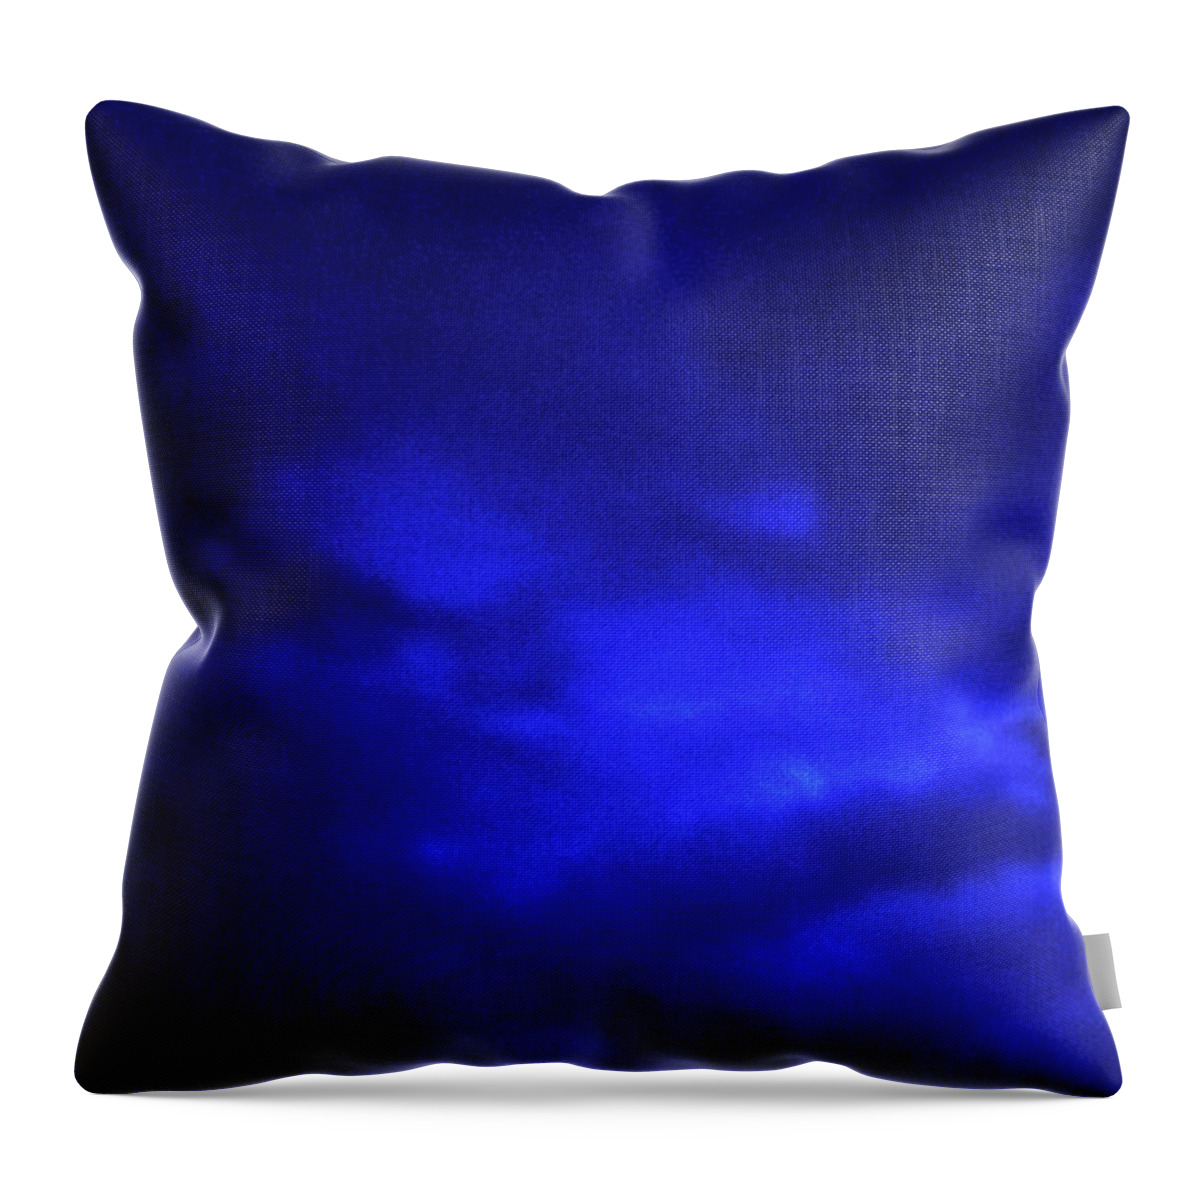 Sky Throw Pillow featuring the photograph Sapphire Sky by Kathy Corday